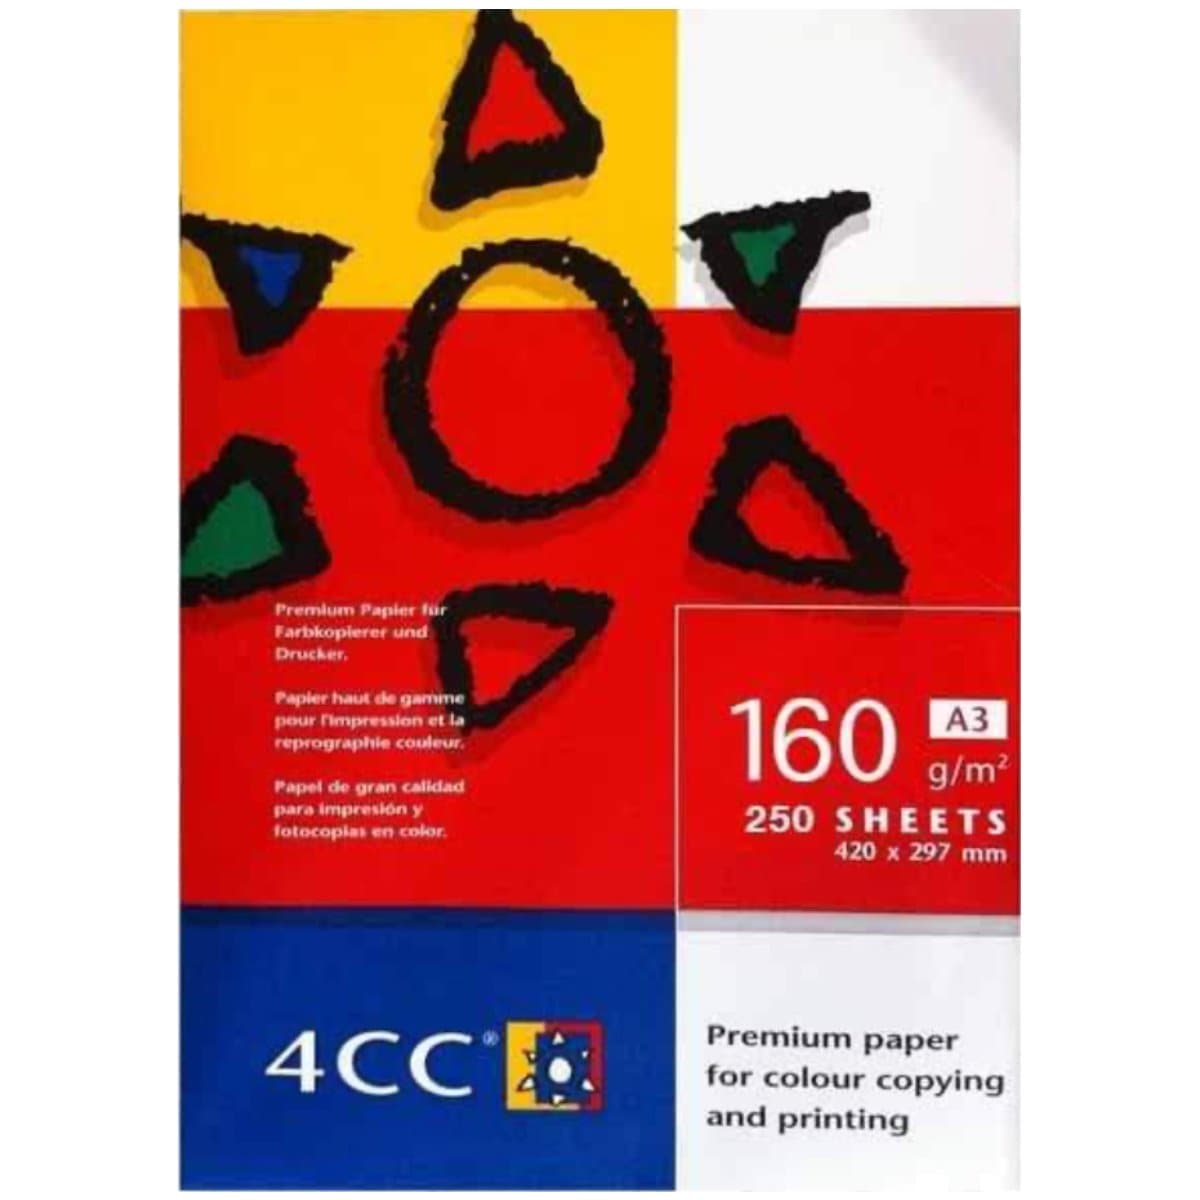 4CC Premium Paper A3, 160gsm, 250sheets/pack, White